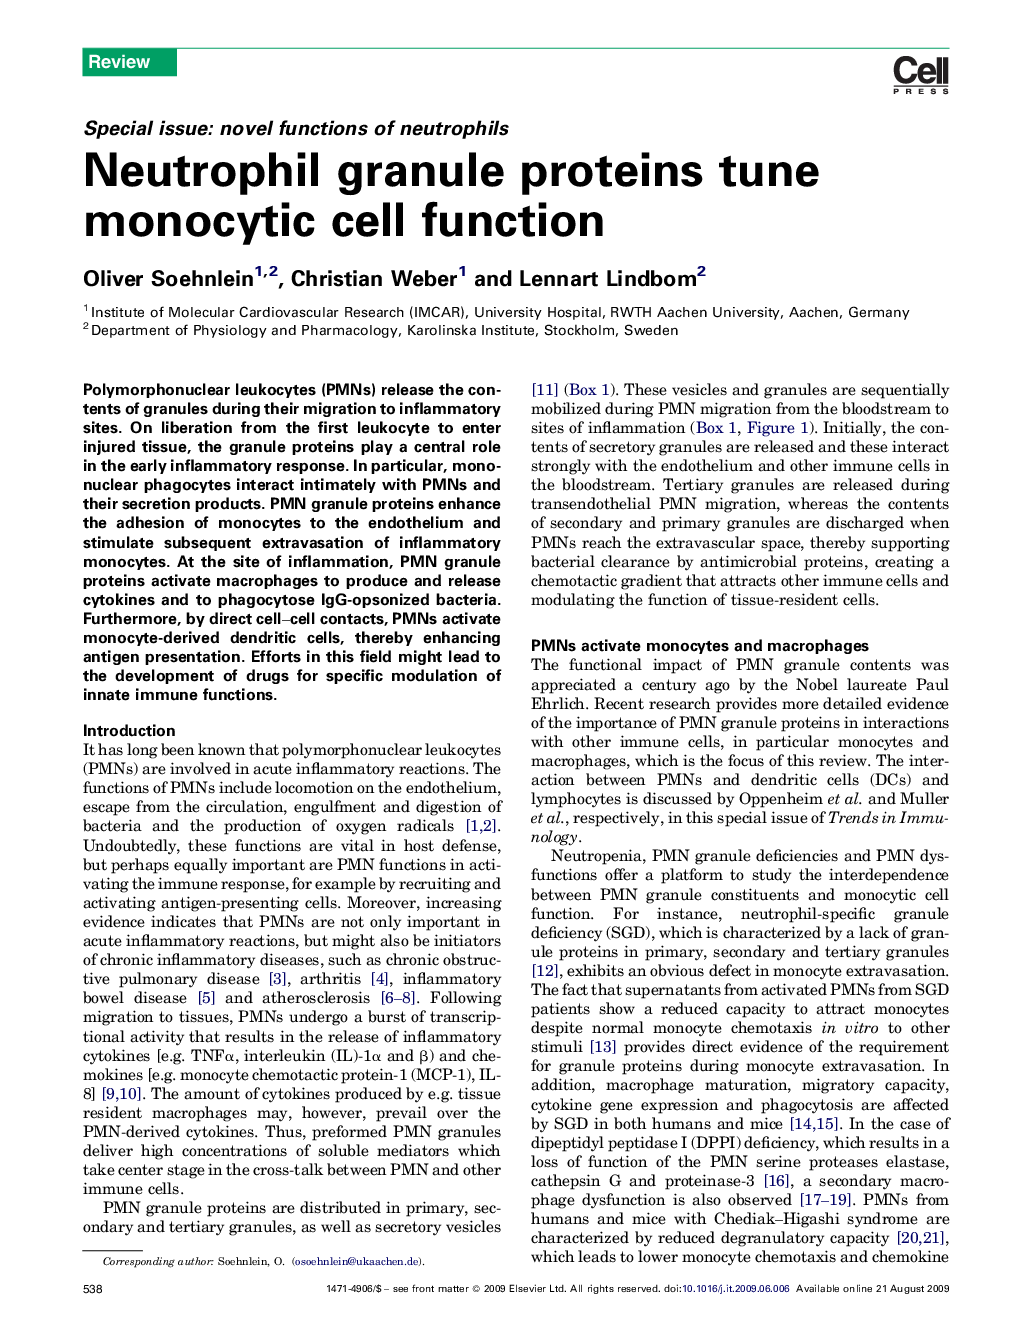 Neutrophil granule proteins tune monocytic cell function